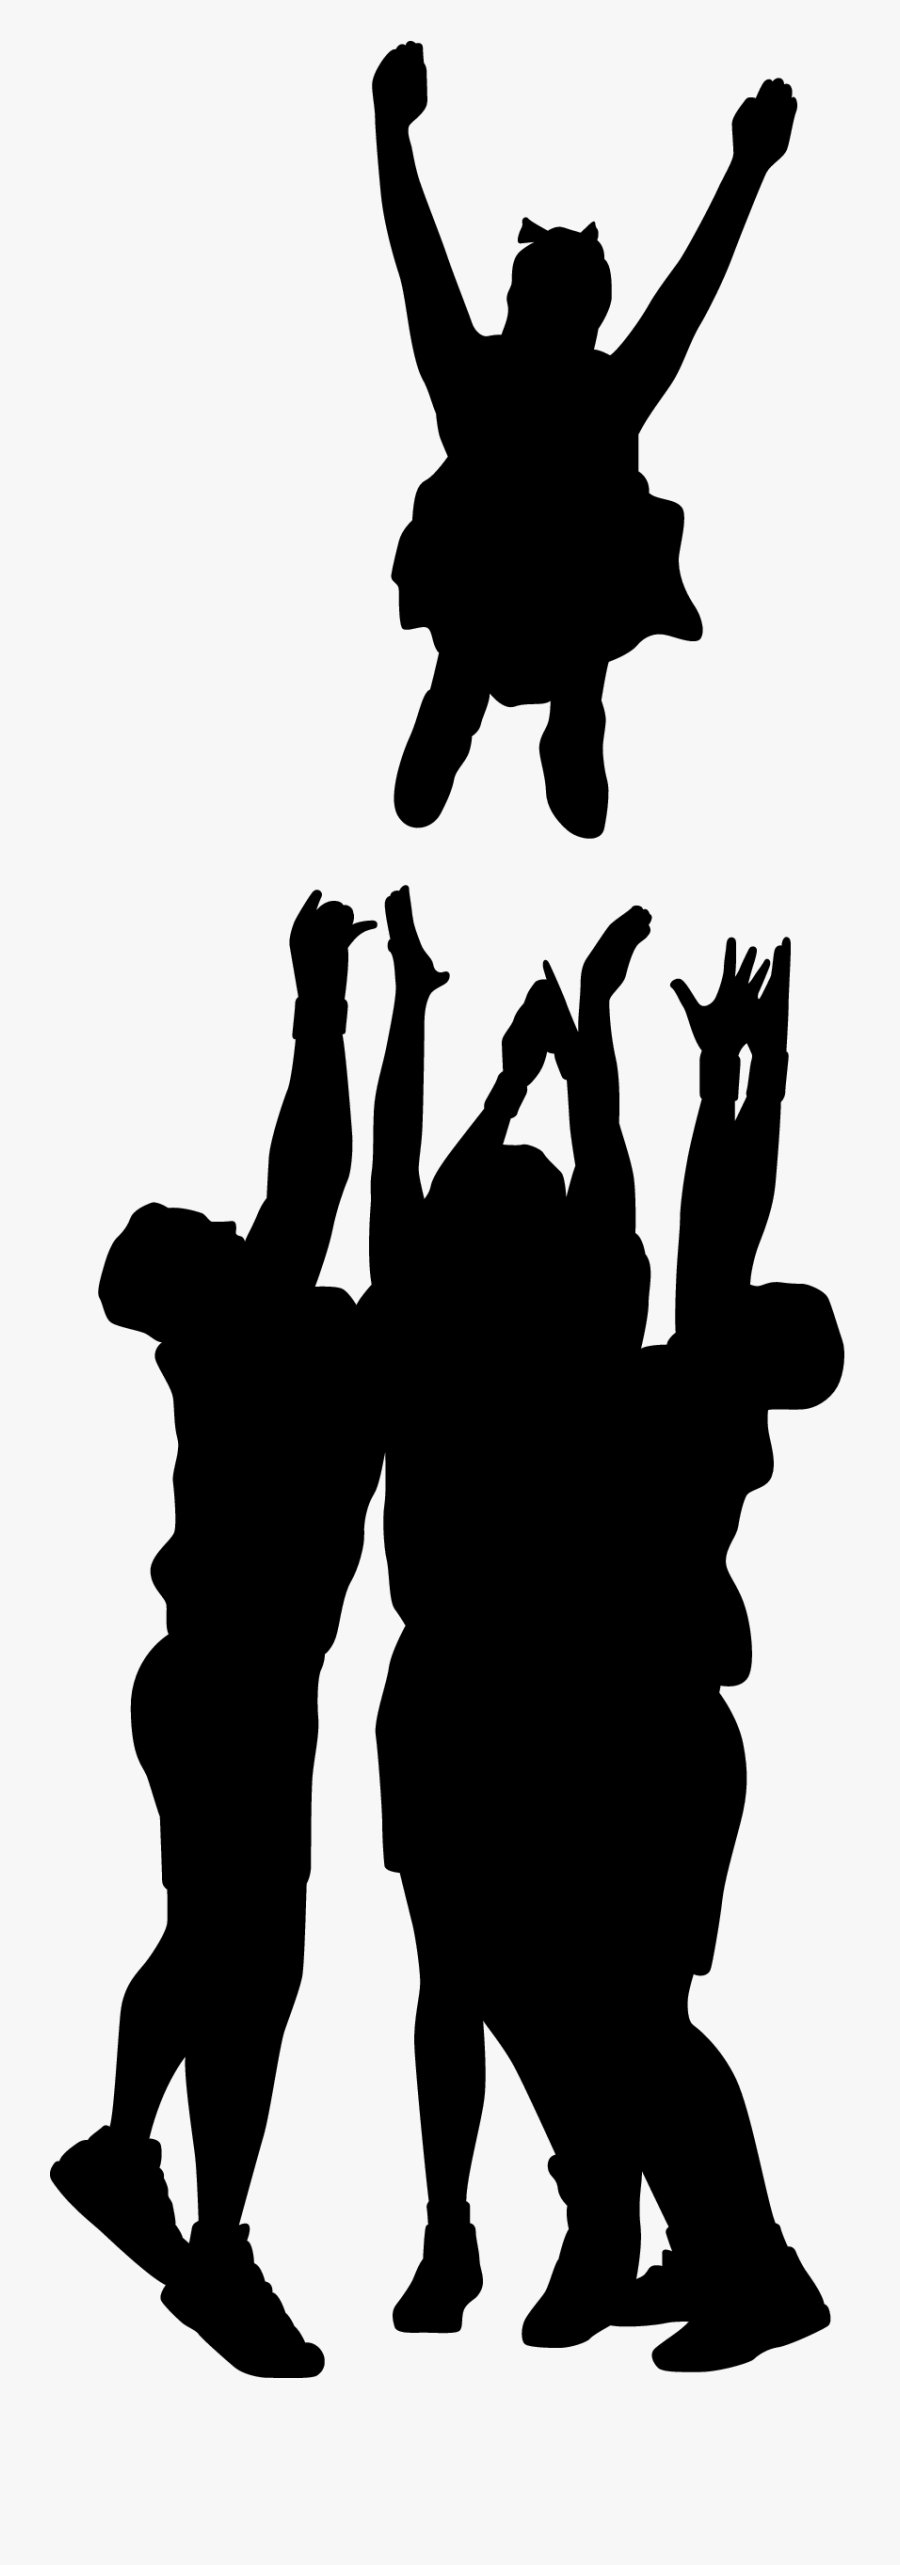 Clip Art Cheerleading Silhouette Images - Cheerleading Silhouettes, Transparent Clipart